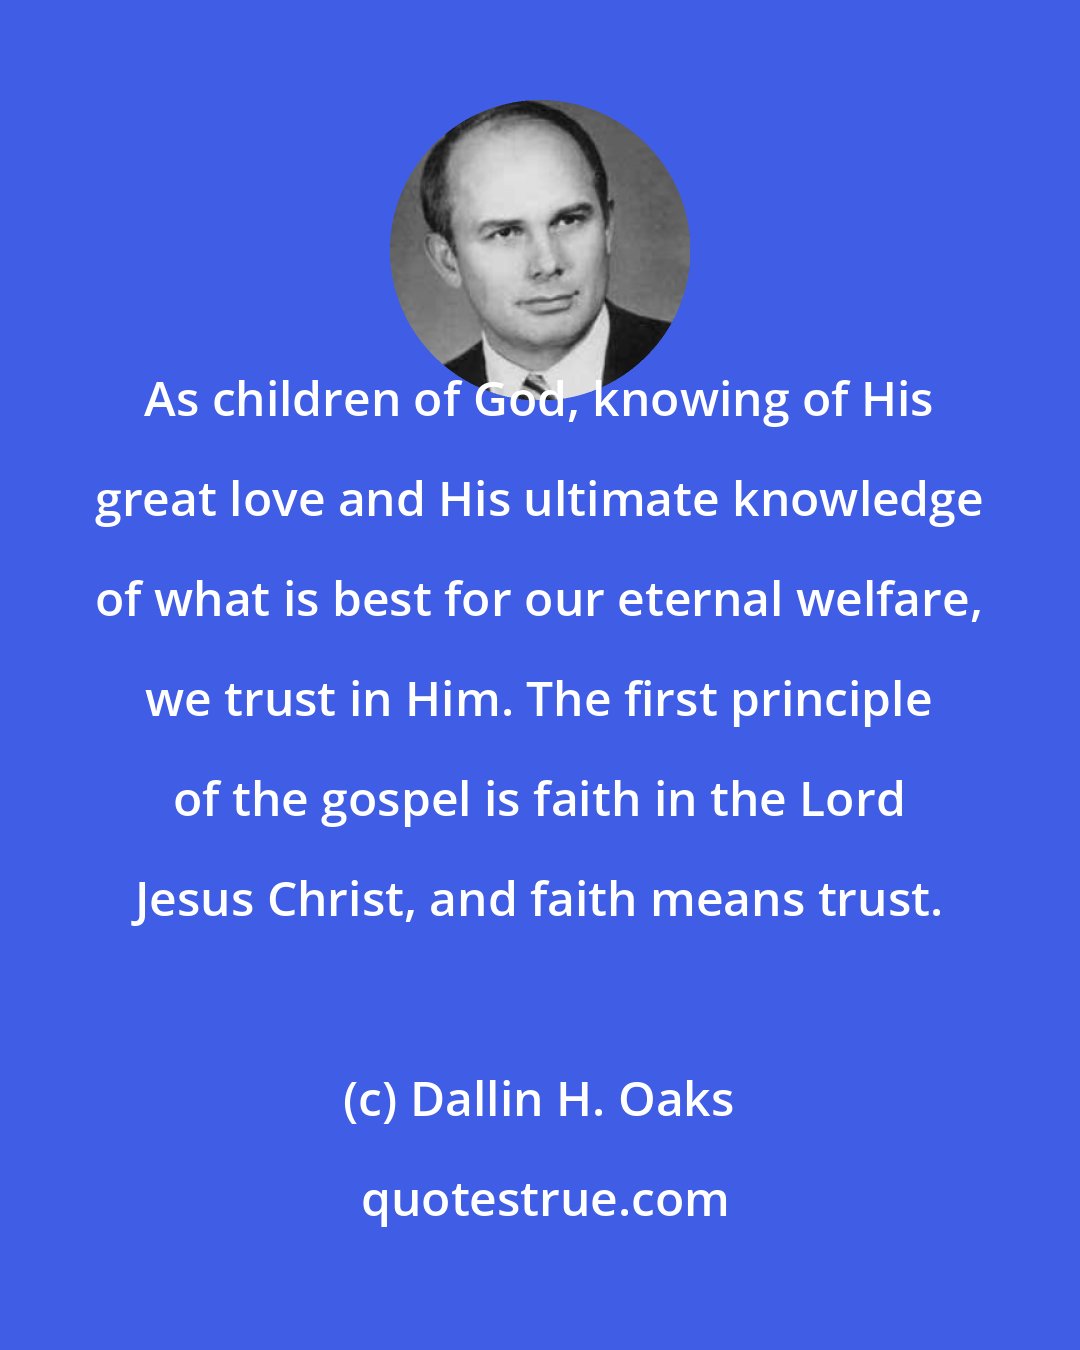 Dallin H. Oaks: As children of God, knowing of His great love and His ultimate knowledge of what is best for our eternal welfare, we trust in Him. The first principle of the gospel is faith in the Lord Jesus Christ, and faith means trust.